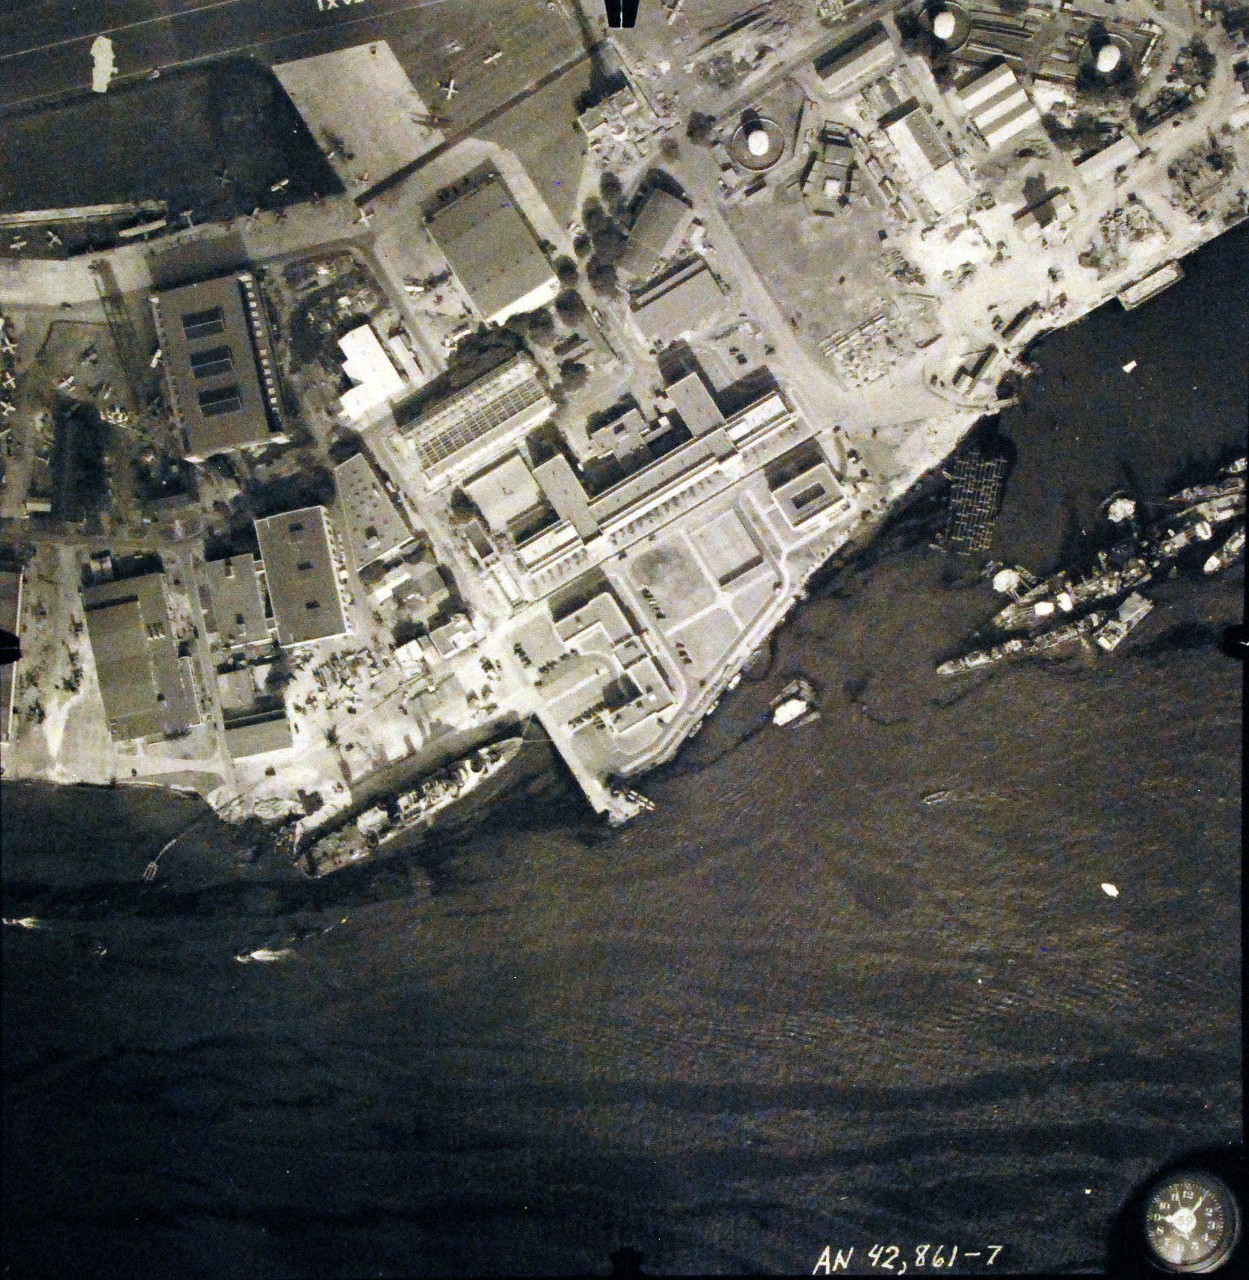 80-G-387568:  Pearl Harbor Attack, 7 December 1941.  Aerial view of "Battleship Row" moorings on the southern side of Ford Island, 10 December 1941, showing damage from the Japanese raid three days earlier.  USS California (BB 44) and USS Curtiss (AV 4) are shown.  Note dark oil streaks on the harbor surface, originating from the sunken battleships.  Photographed by VJ-1 at an altitude of 3,000 feet and released November 9, 1950. U.S. Navy photograph, now in the collections of the National Archives .   (9/22/2015).